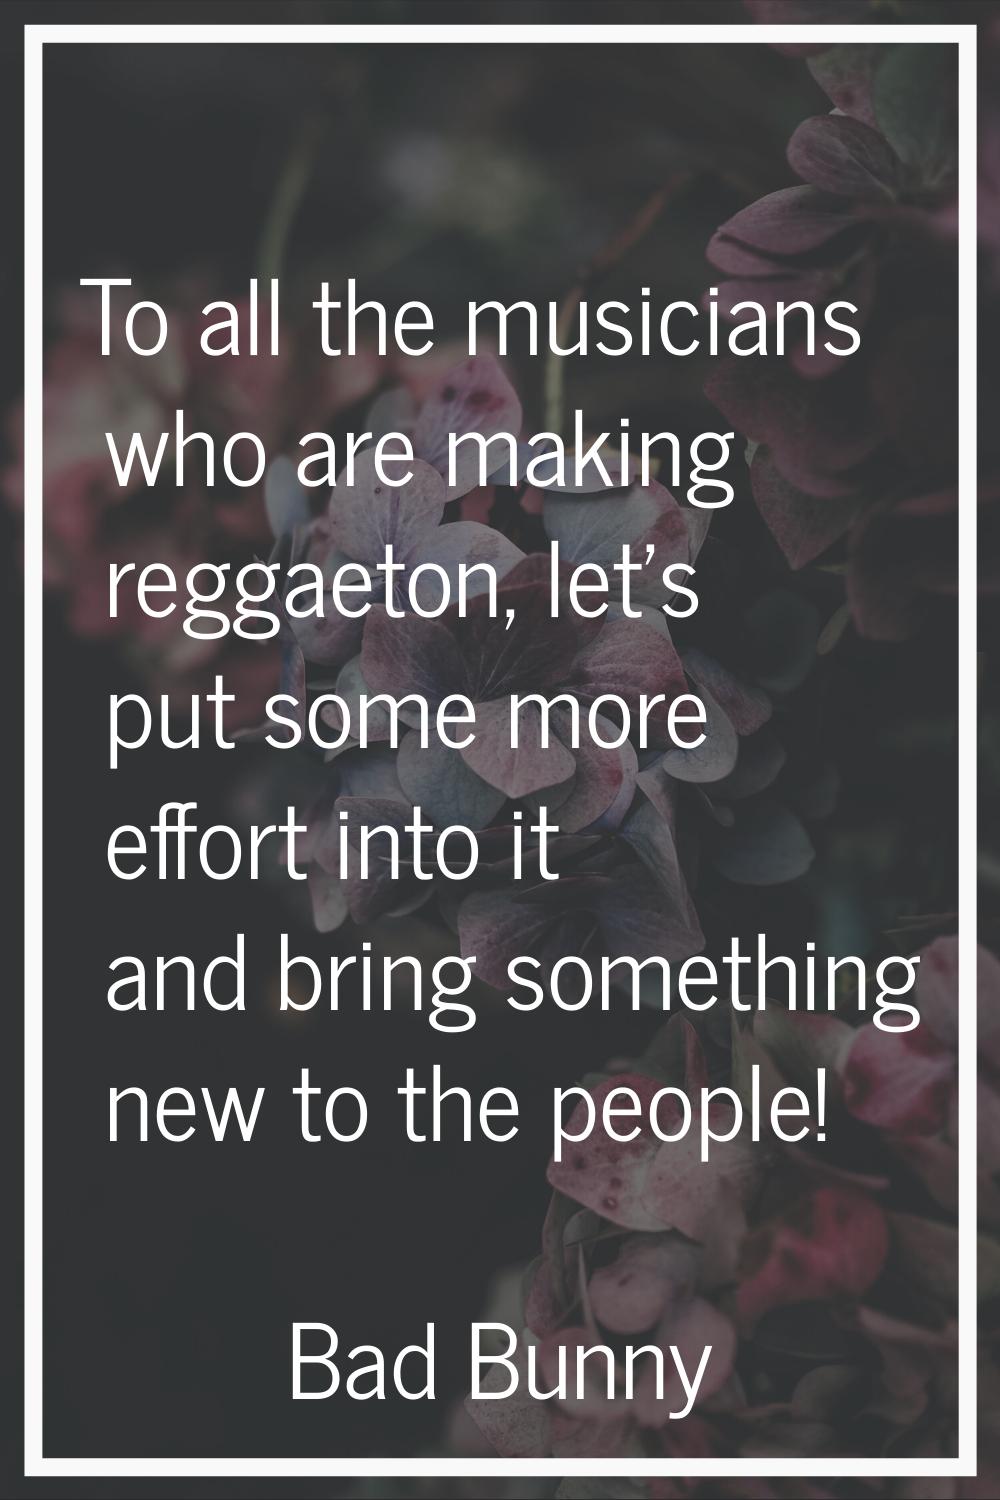 To all the musicians who are making reggaeton, let's put some more effort into it and bring somethi